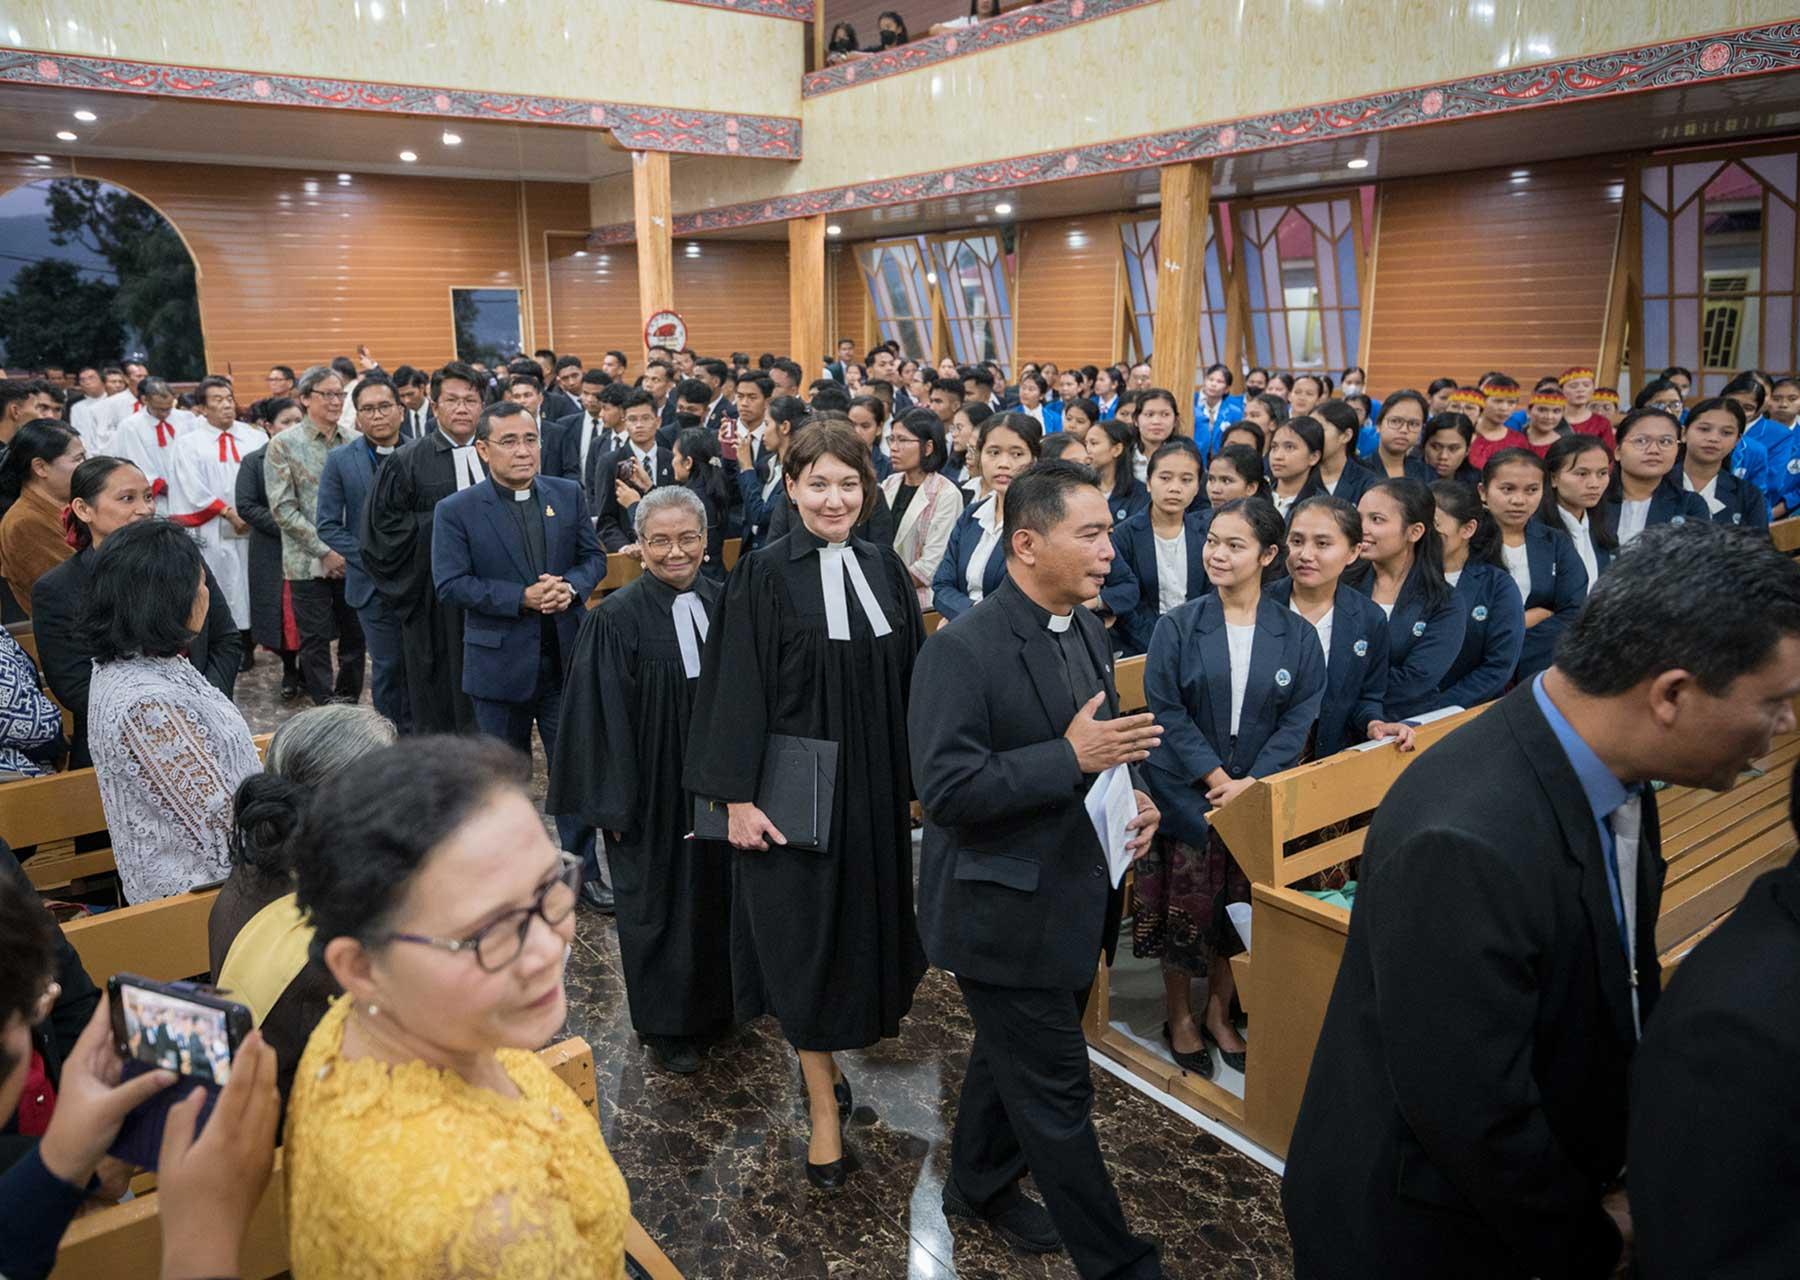 23 November 2023, Tarutung, Indonesia: Lutheran World Federation general secretary Rev. Dr Anne Burghardt enters as part of the procession as an ecumenical prayer service is celebrated at the Pearaja church of the Protestant Christian Batak Church (HKBP) gathering some 1,000 people from various congregations and attended by church leaders from 14 different Lutheran churches in Indonesia. Photo: LWF/Albin Hillert